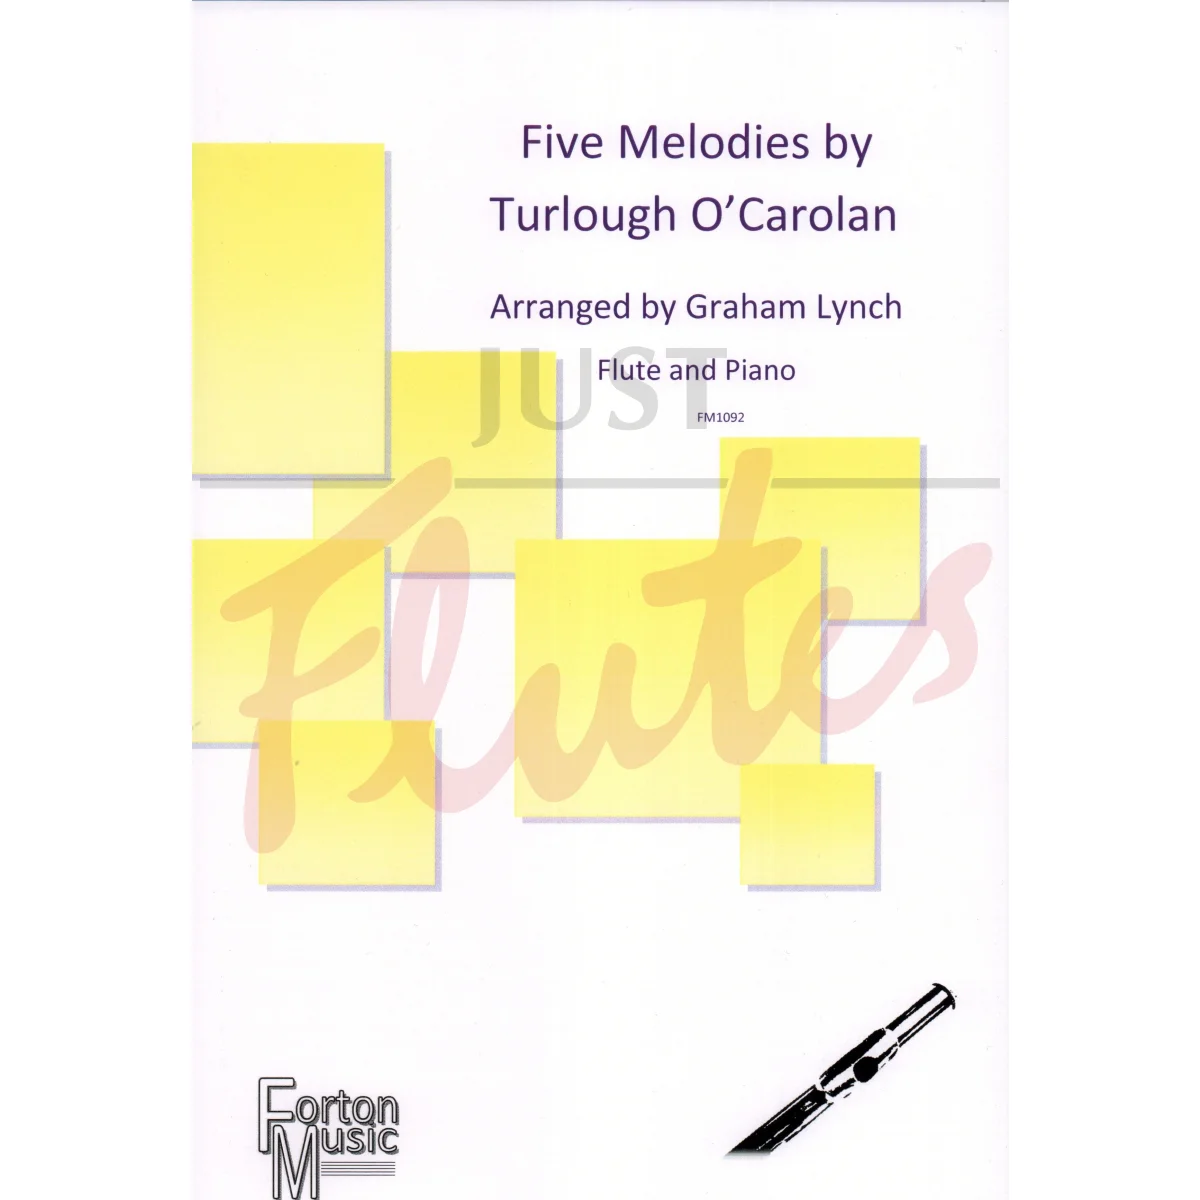 Five Melodies by Turlough O’Carolan for Flute and Piano